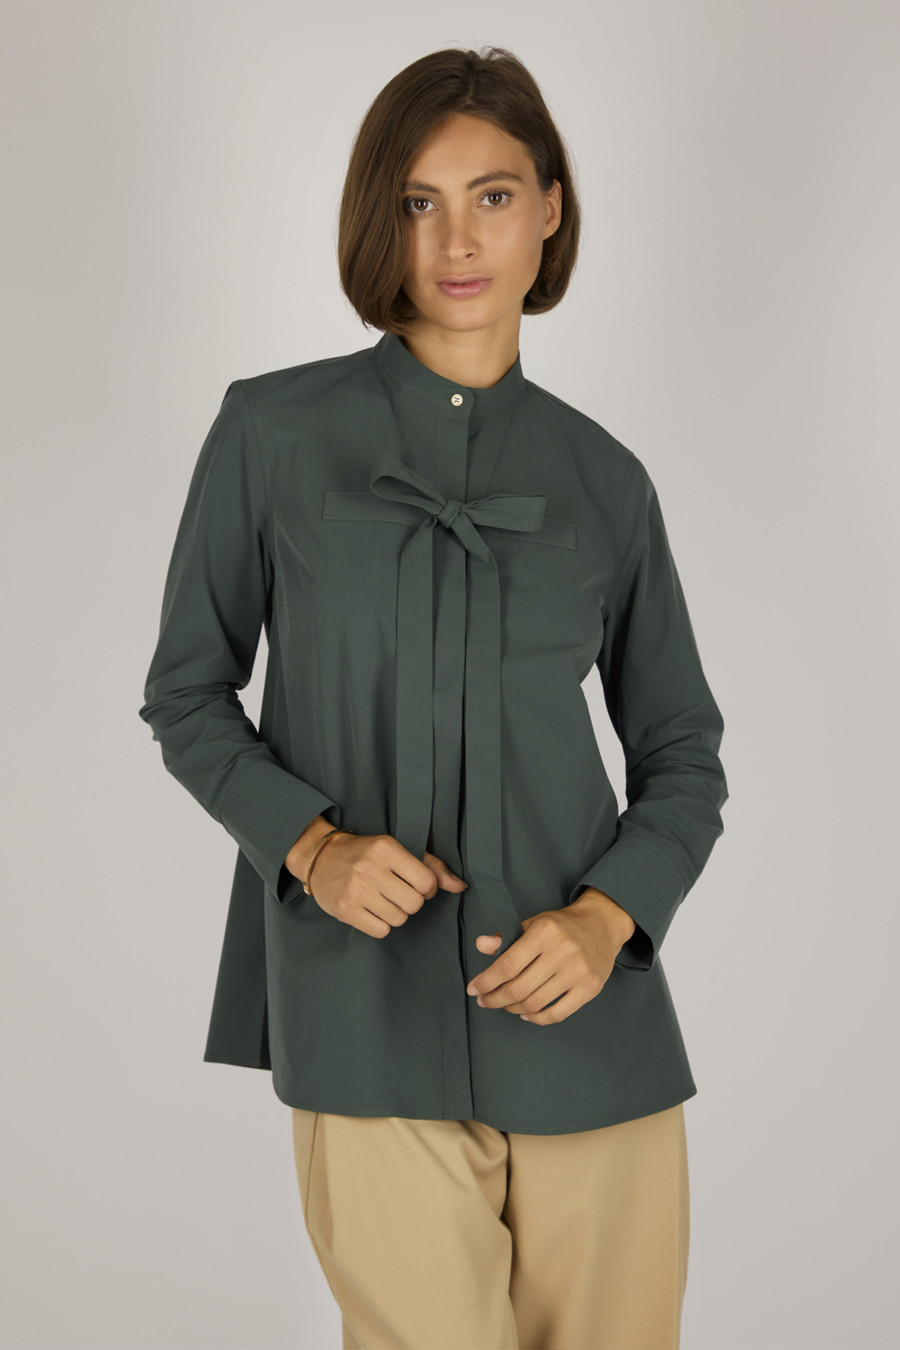 EVE – Blouse with stand-up collar and binding element – Color: Moss